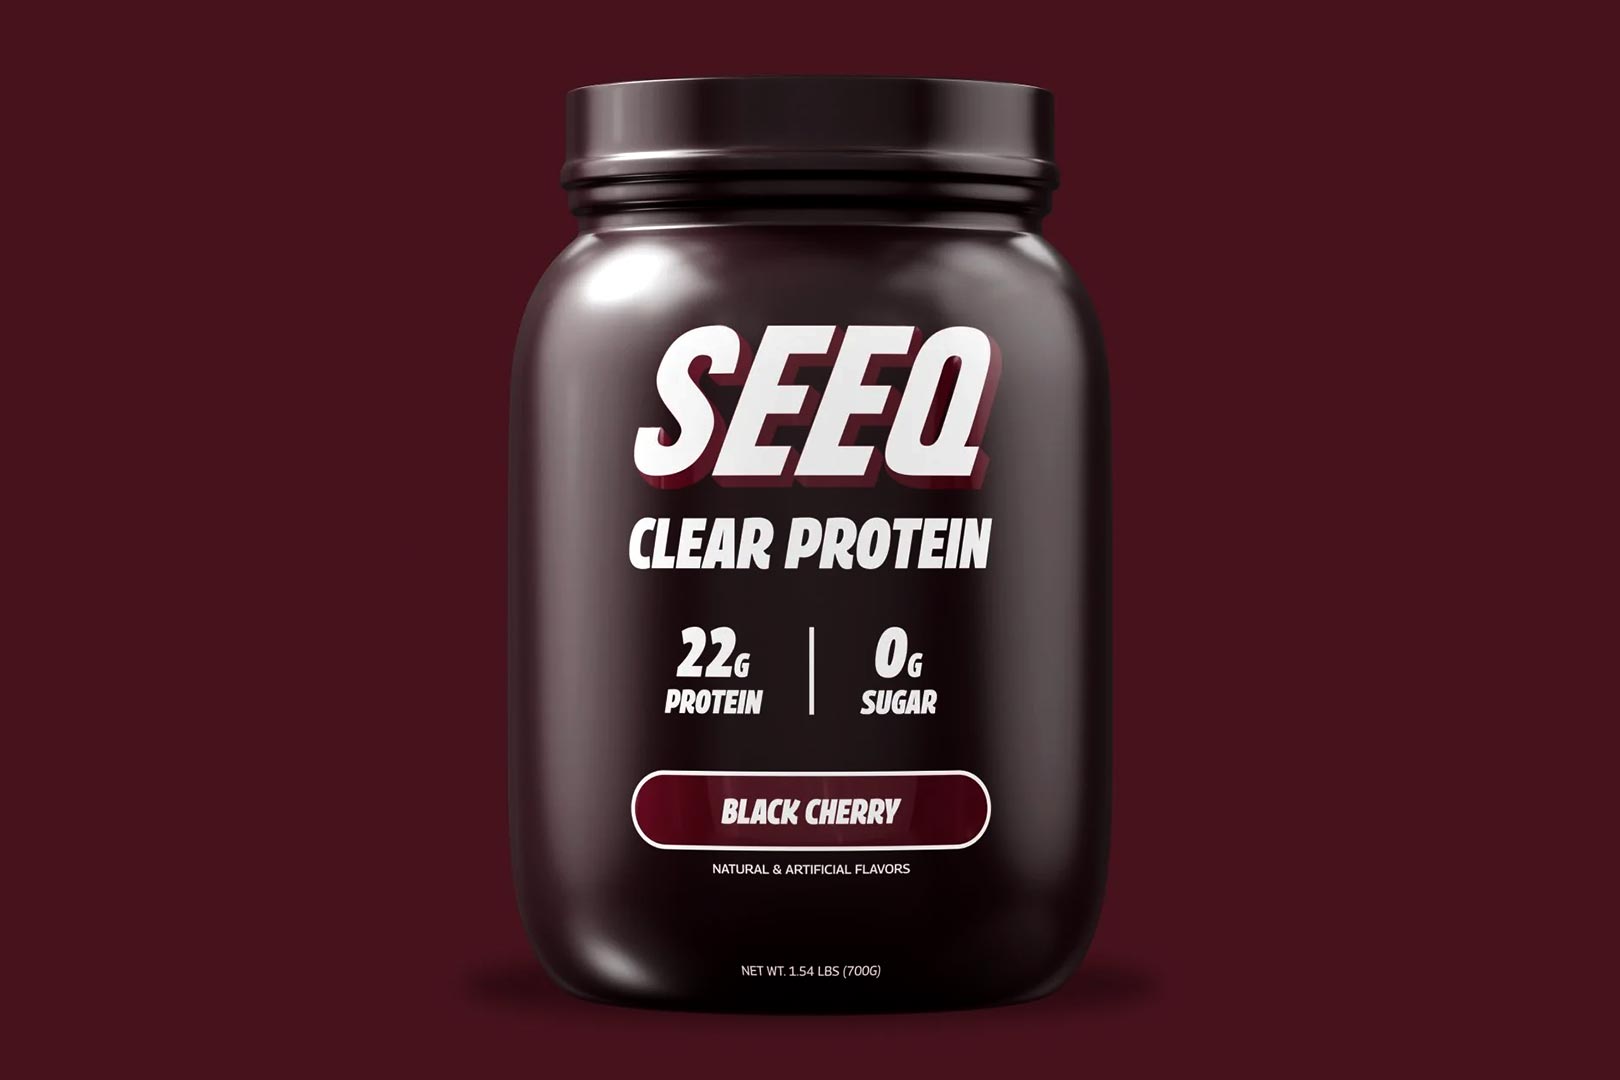 Black Cherry Seeq Clear Protein